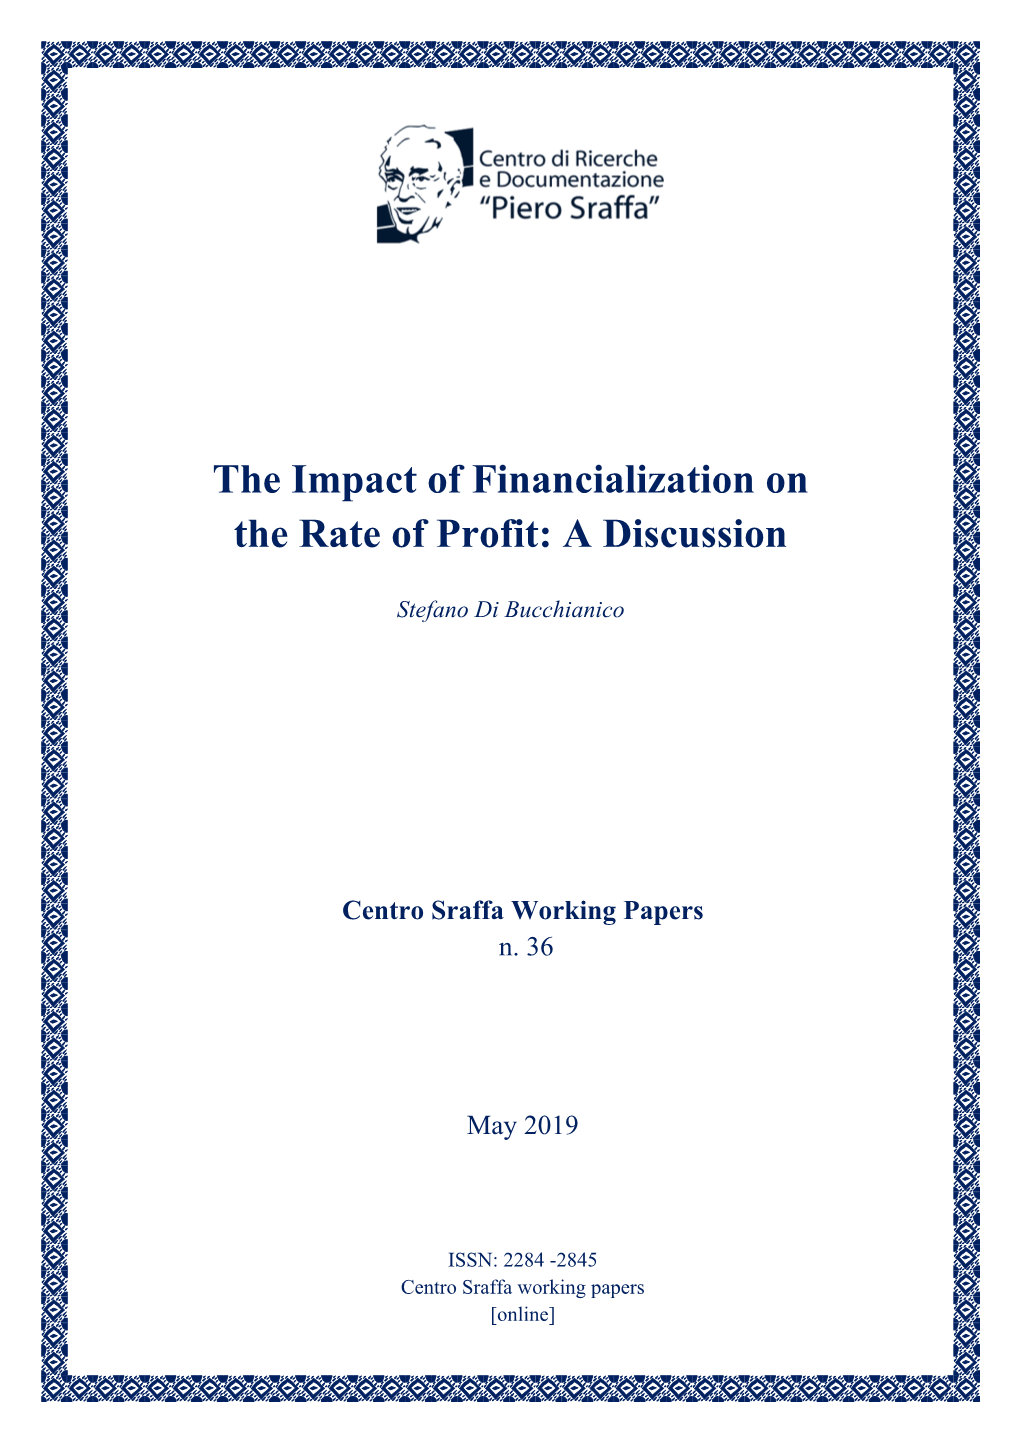 The Impact of Financialization on the Rate of Profit: a Discussion